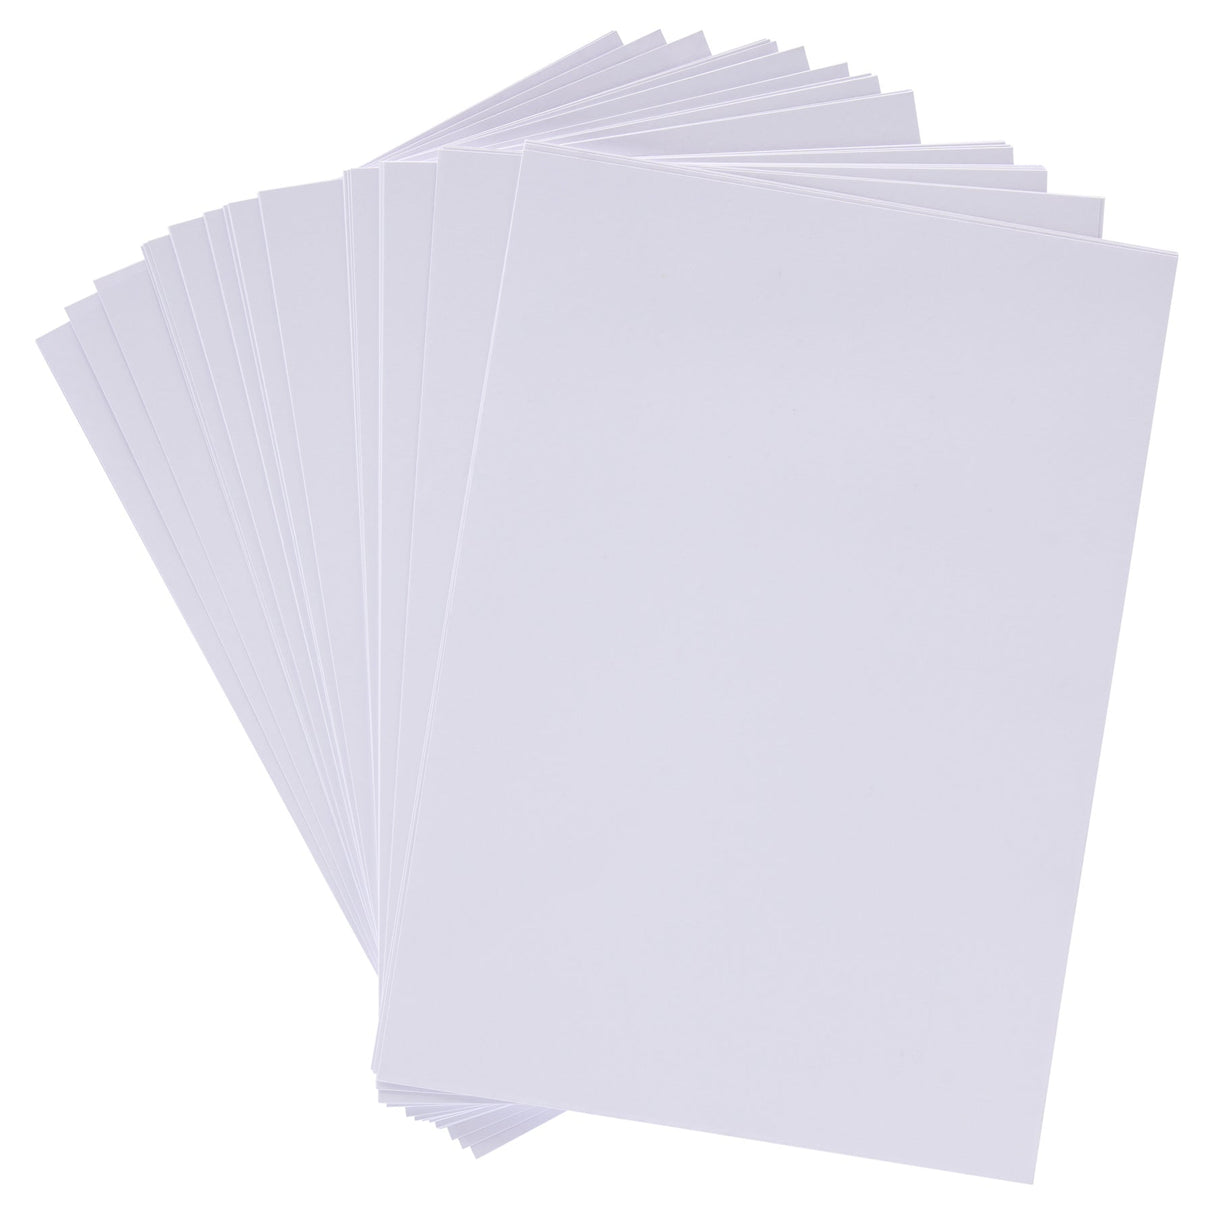 Premier Activity A4 Card - 160 gsm - White - 50 Sheets | Stationery Shop UK